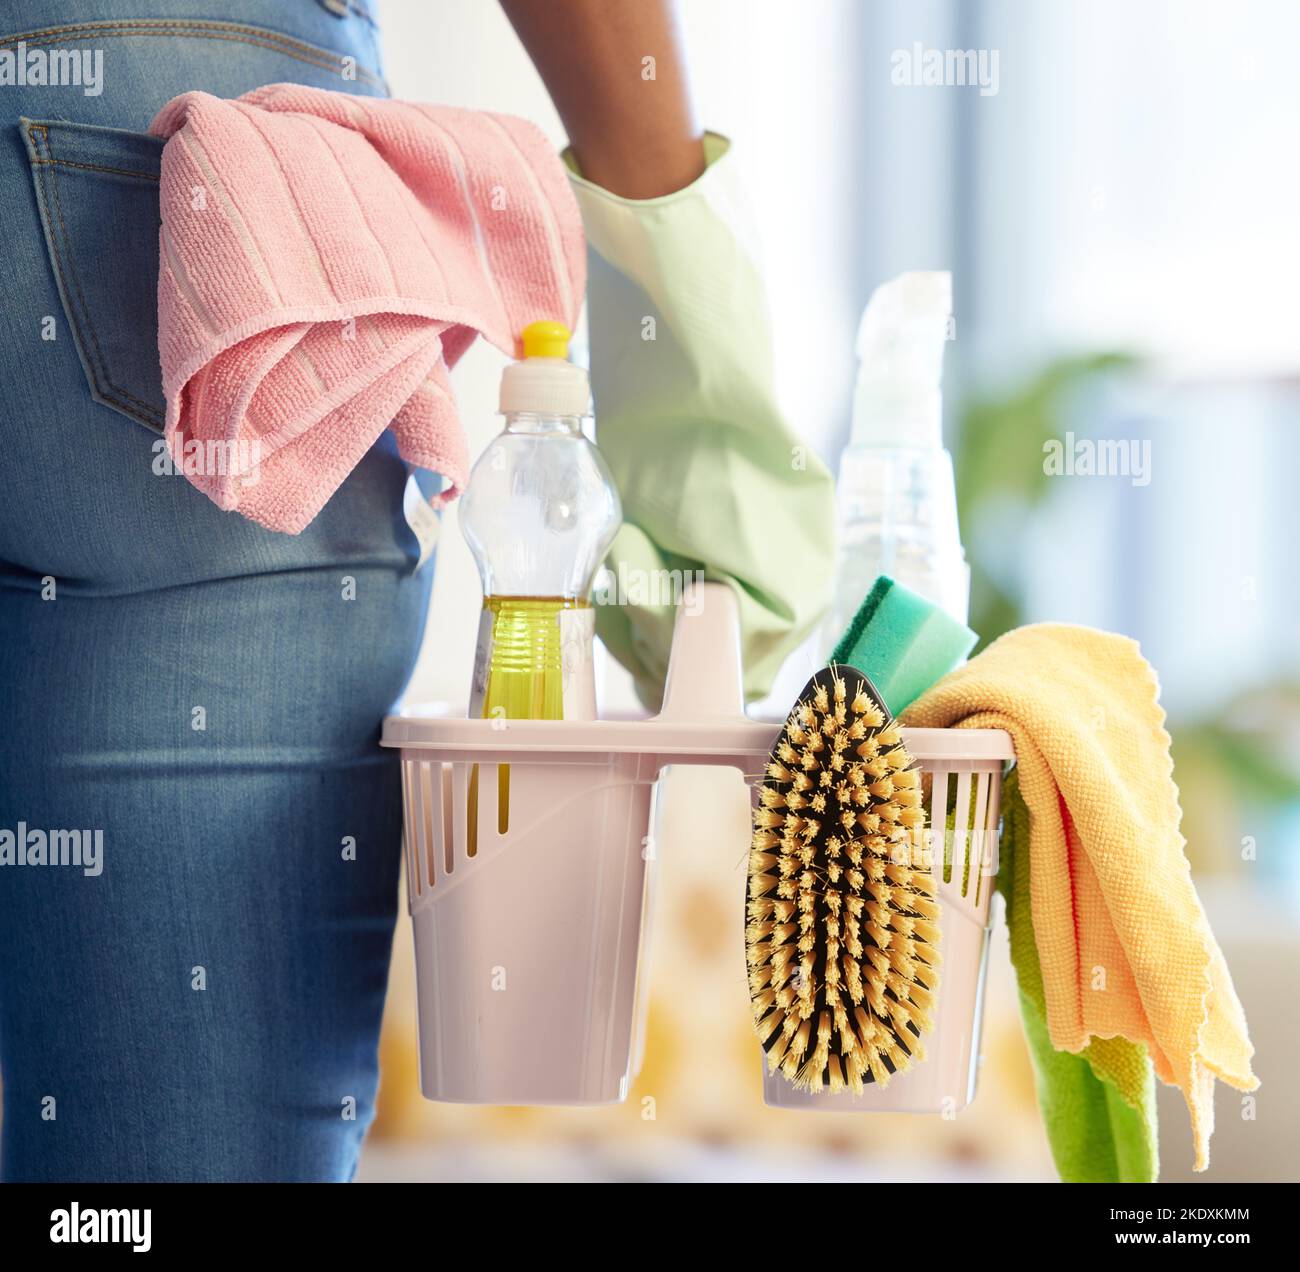 Hand, cleaning products and home supplies for house cleaning service. Cleaner, chemical basket and hygiene safety tools for spring clean worker in Stock Photo